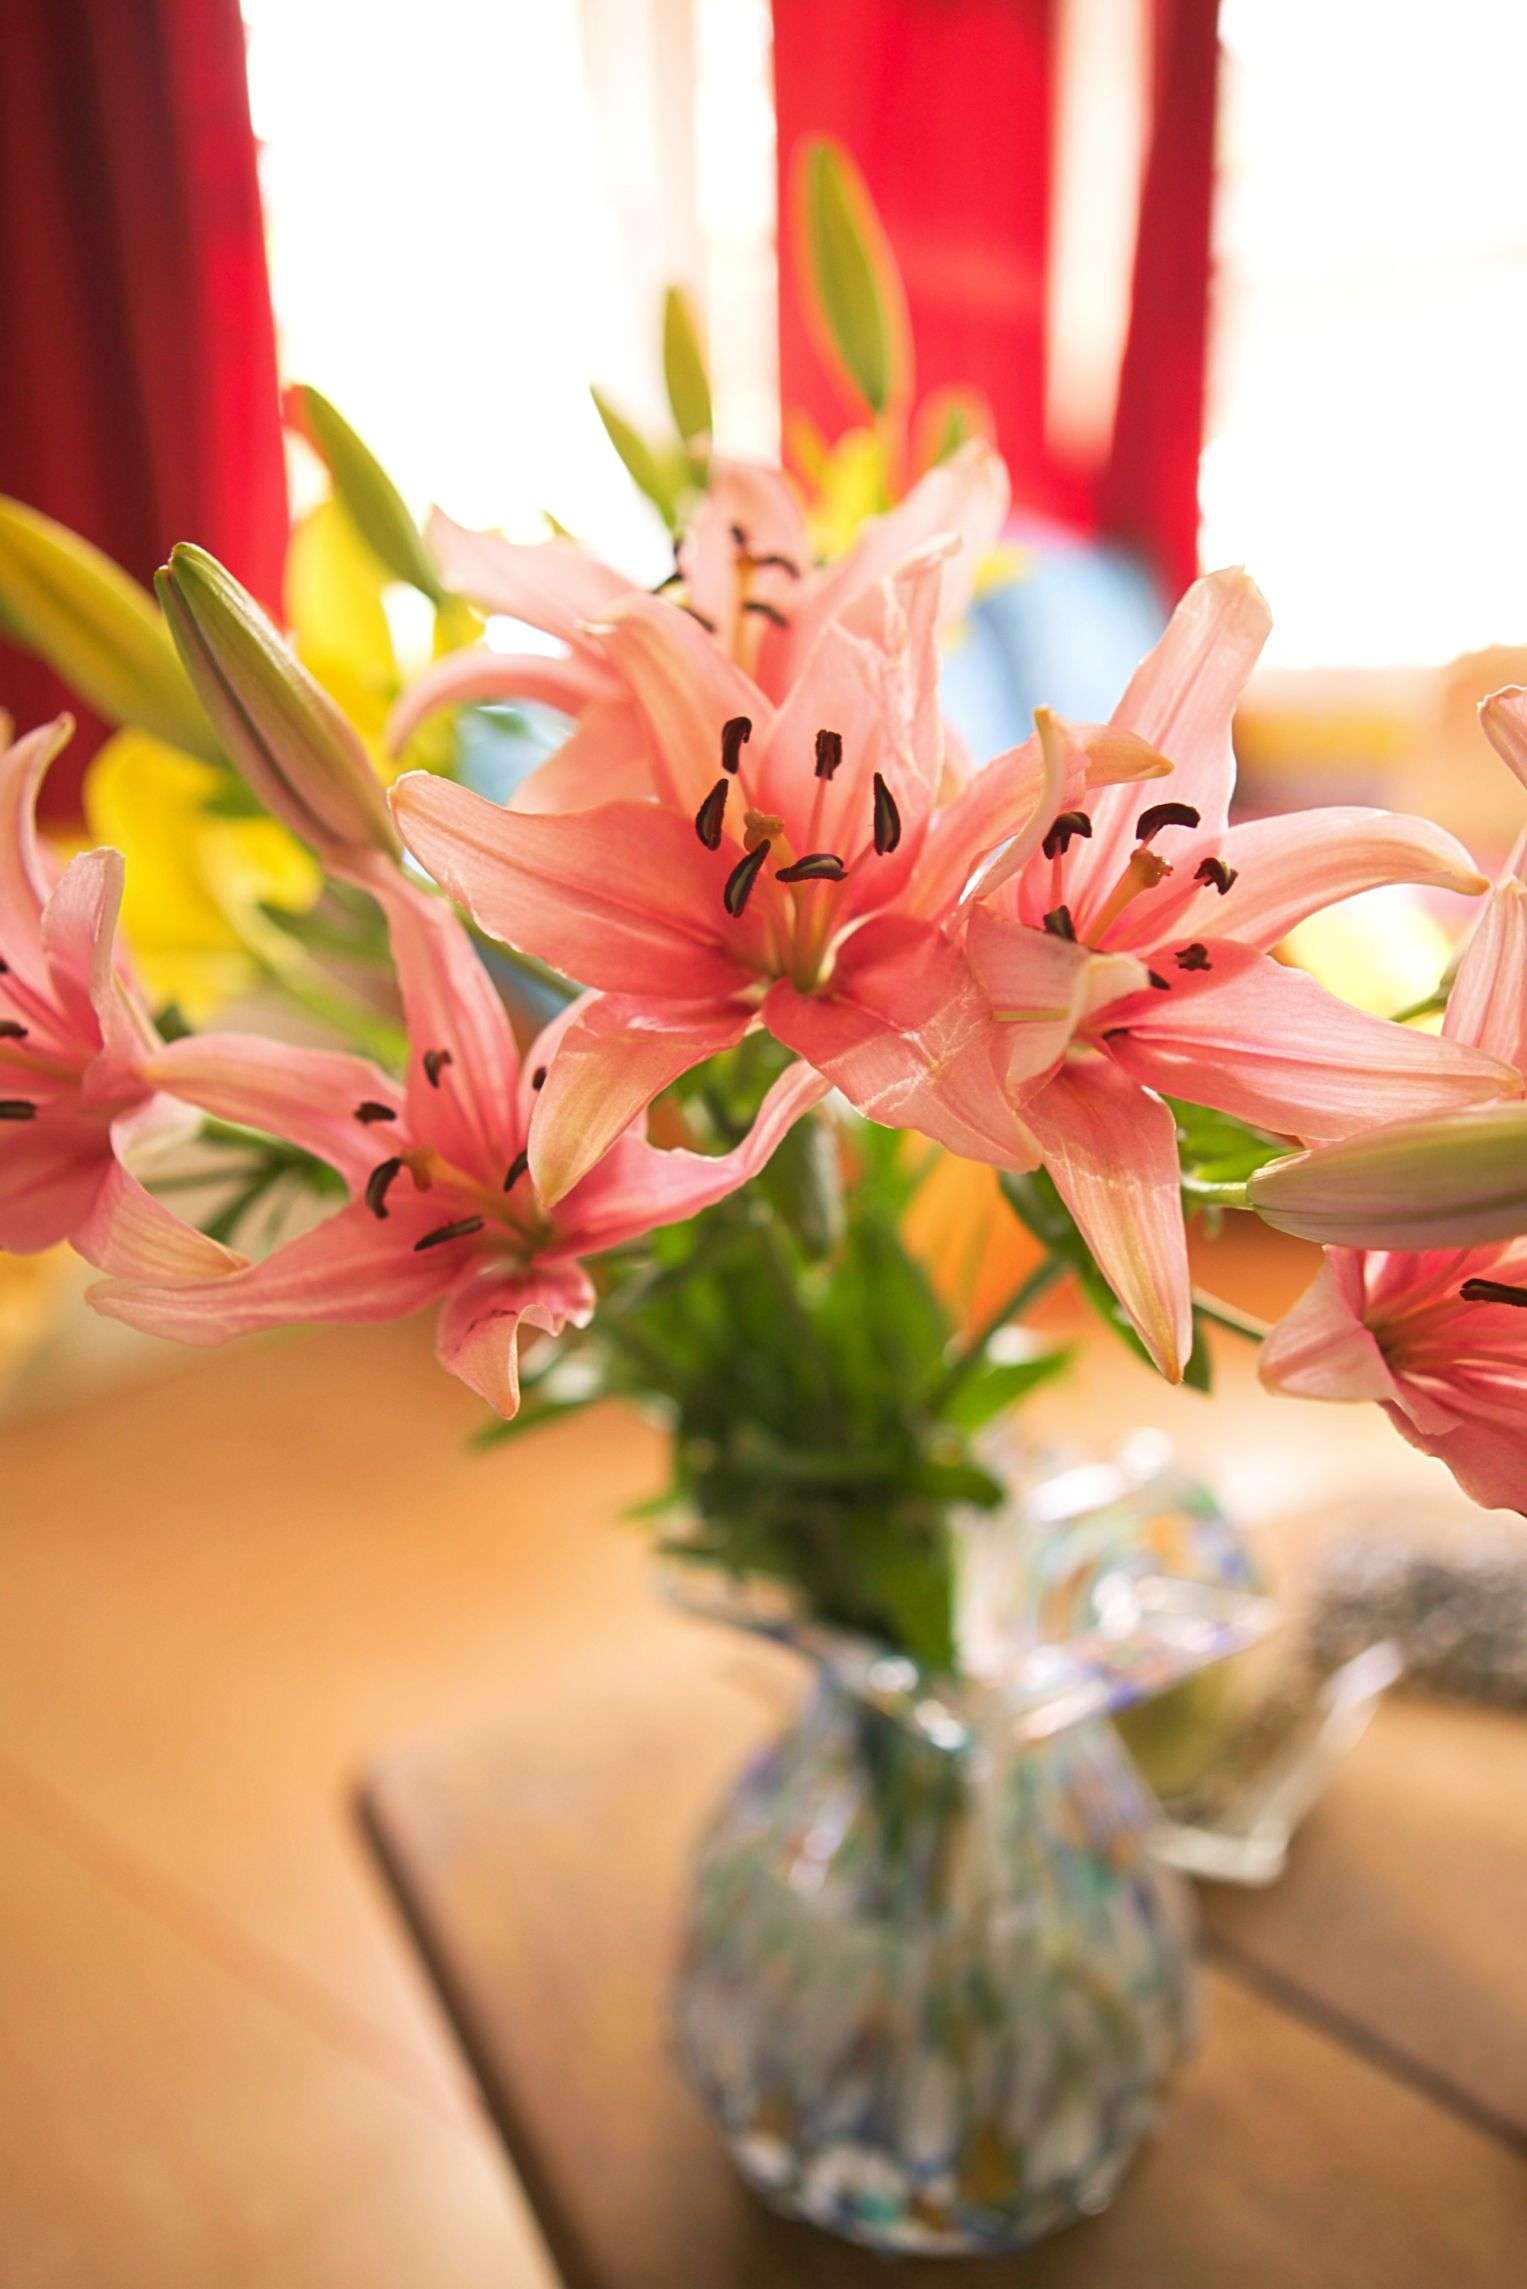 Best Ways to Care for the Asiatic Lily